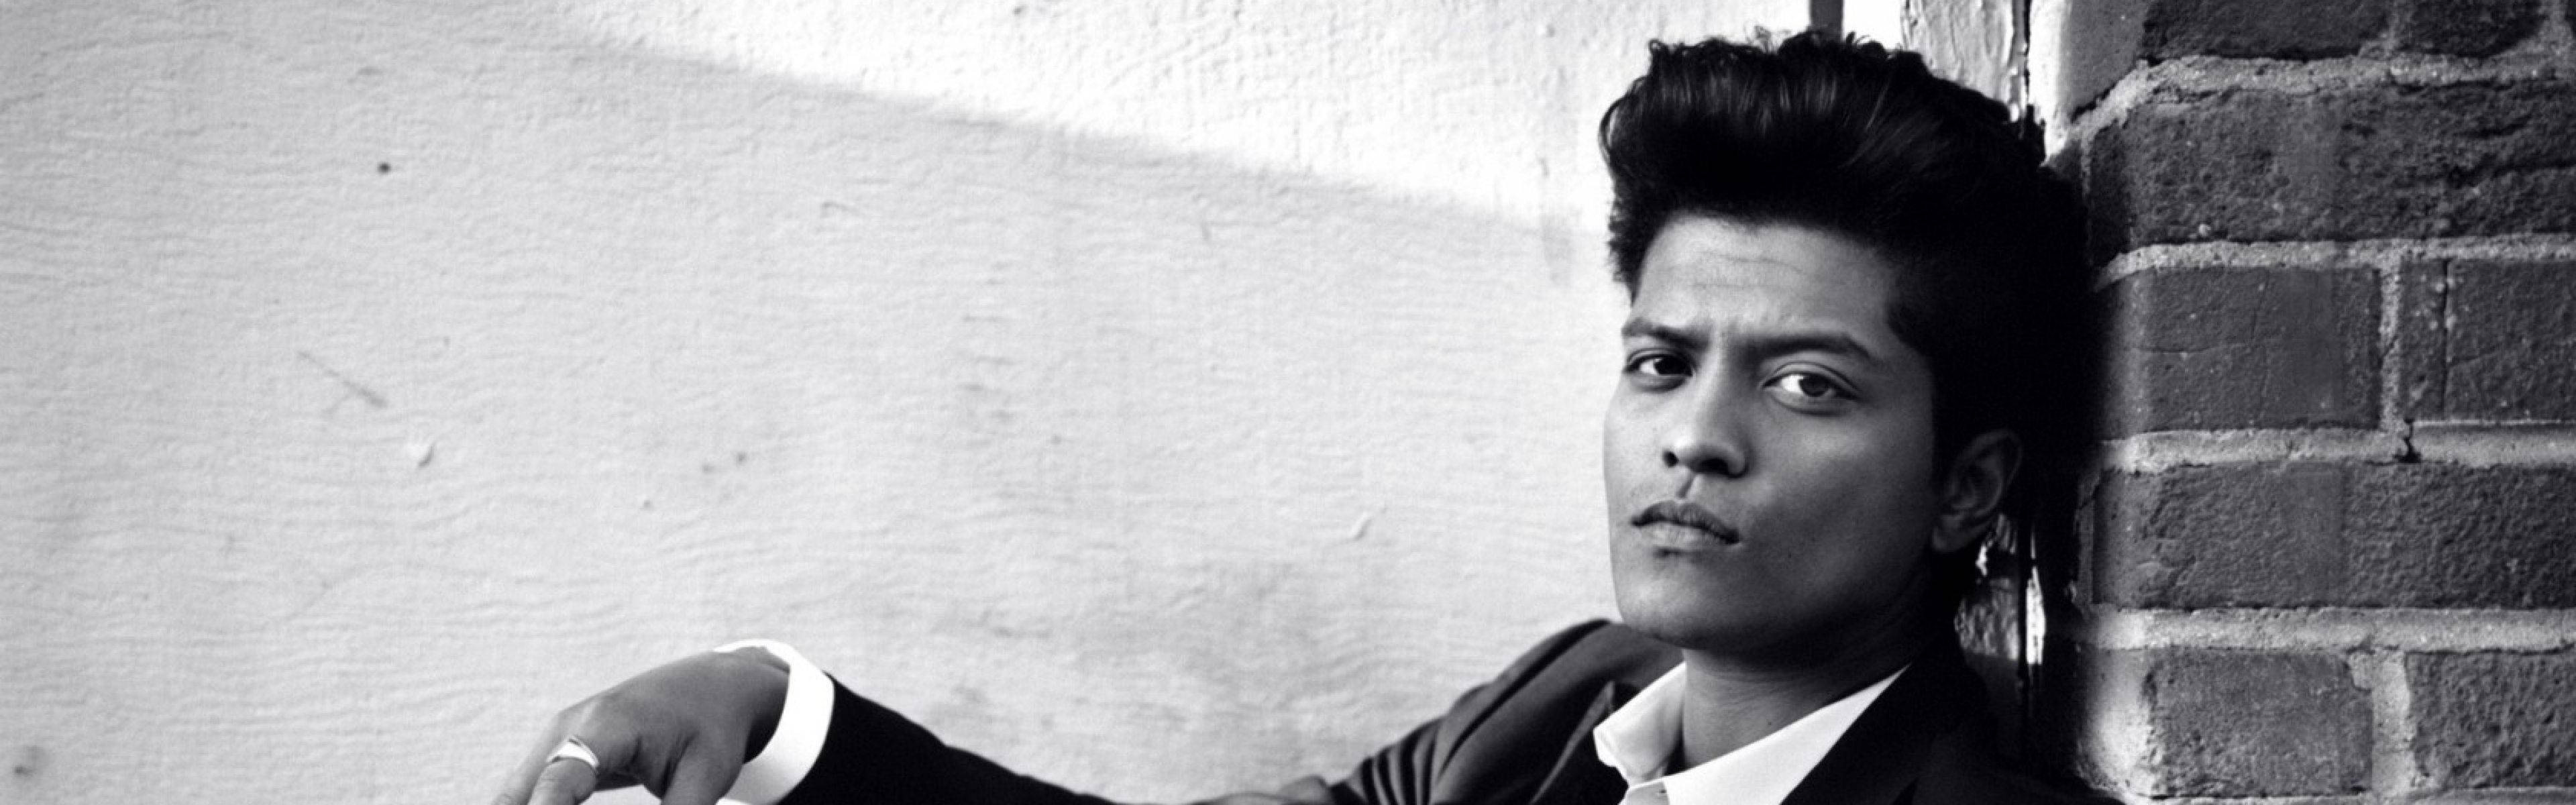 3840X1200 Bruno Mars Wallpaper and Background